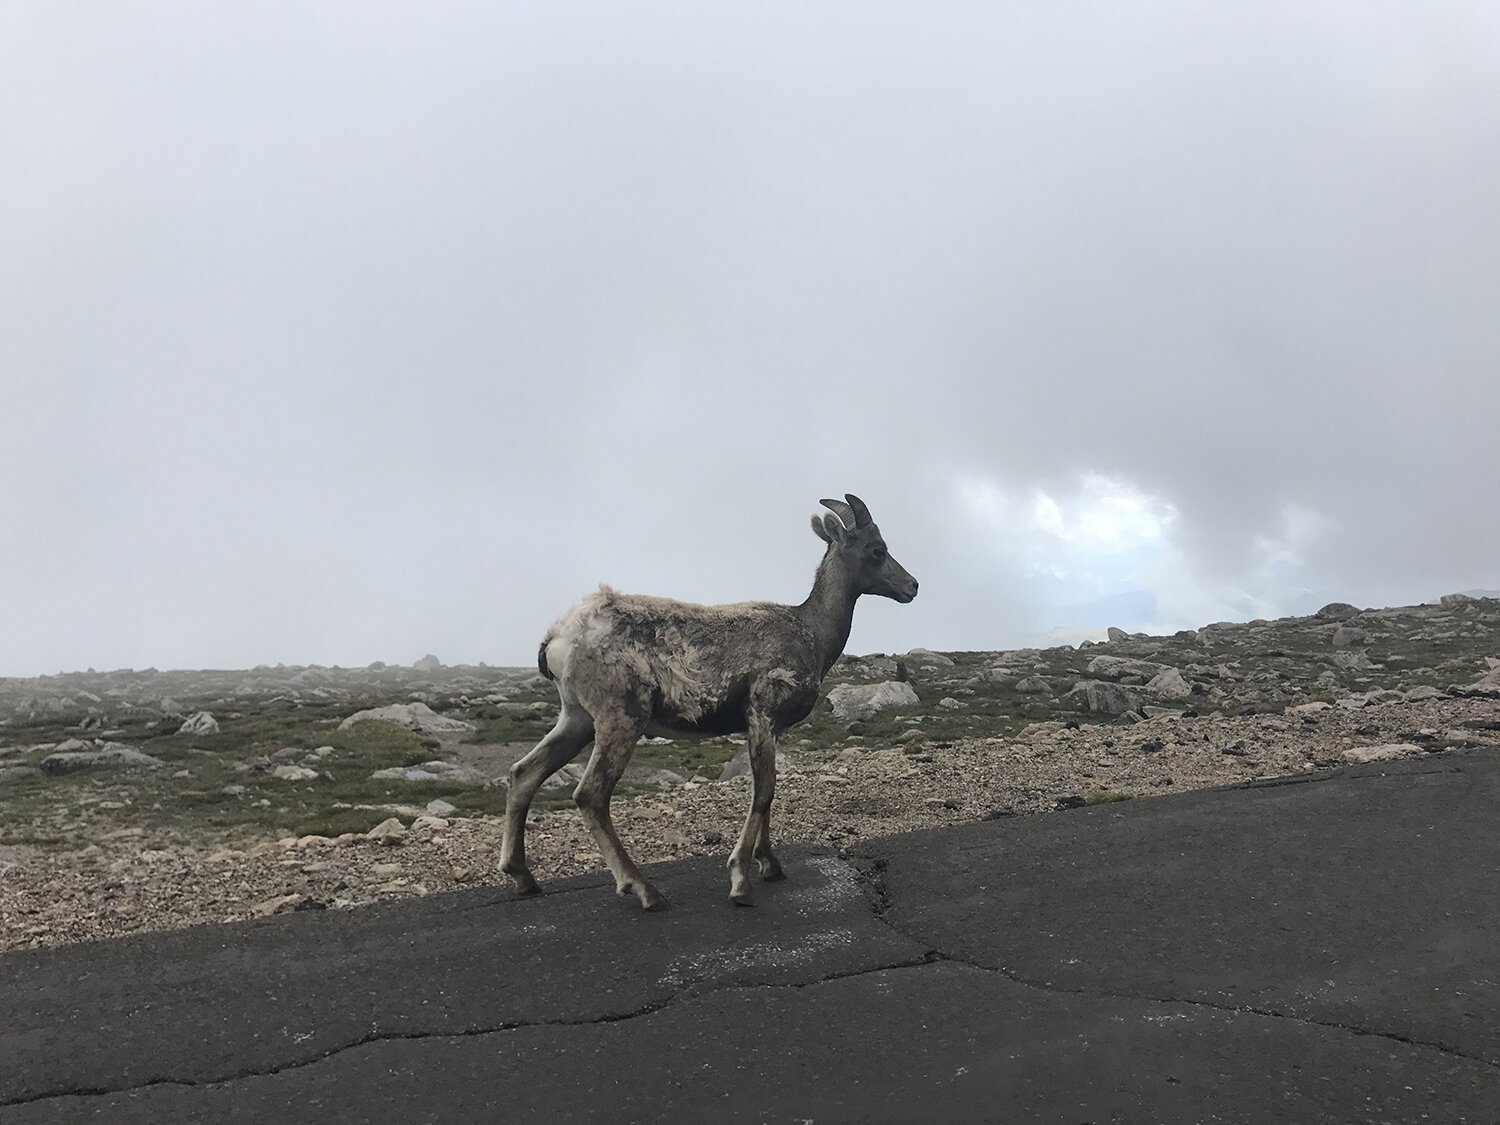 Travels and Curiosities - Mount Evans Scenic Byway